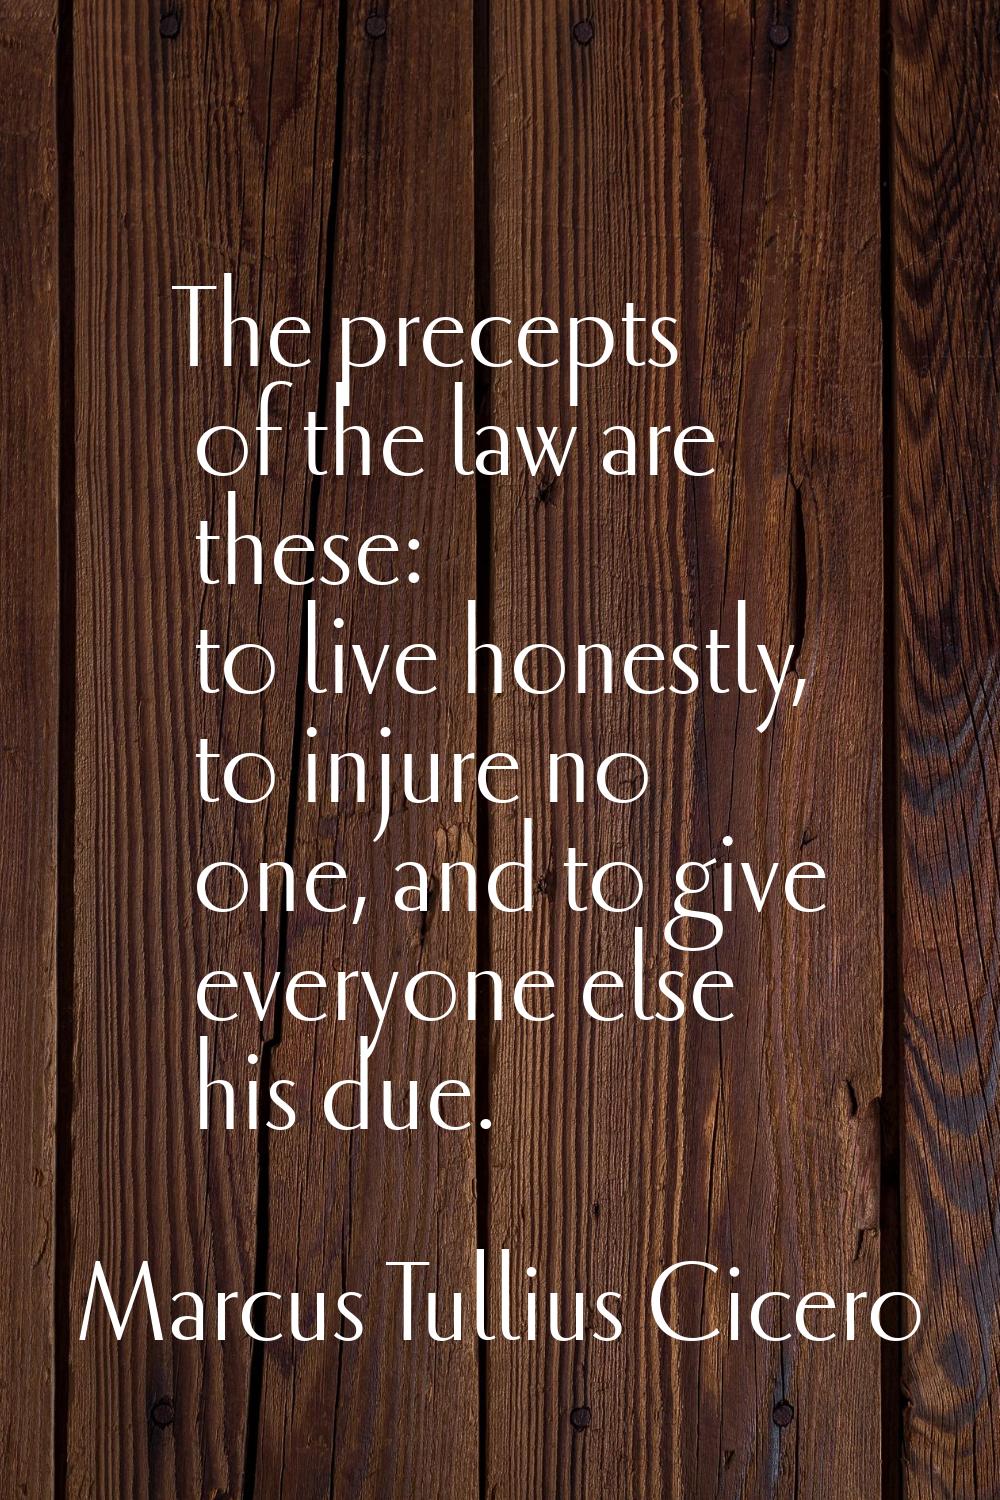 The precepts of the law are these: to live honestly, to injure no one, and to give everyone else hi